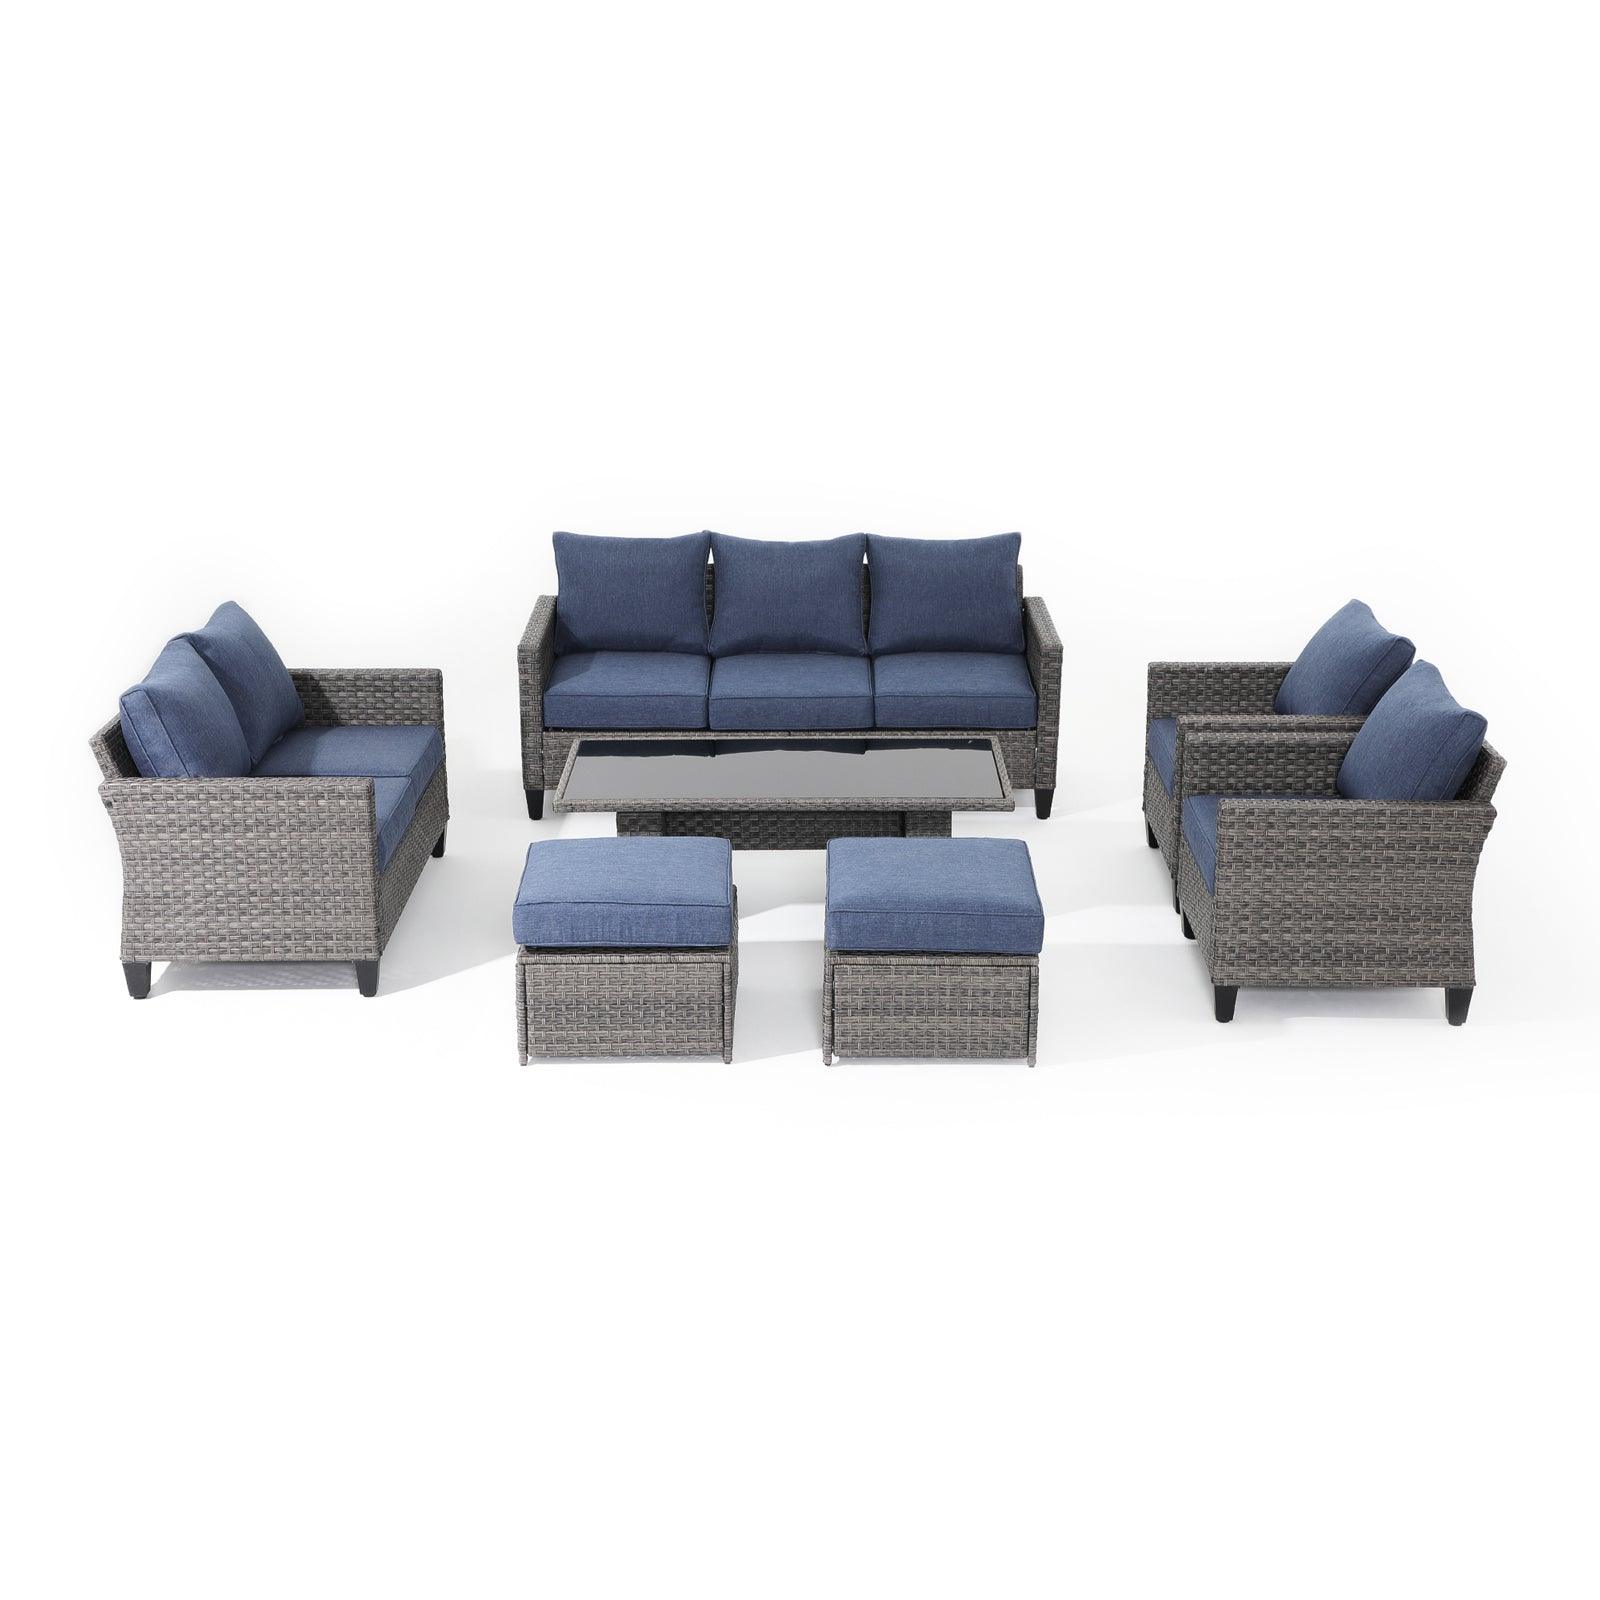 Ayia 7-Piece outdoor Sofa Set with Rattan design, Navy Blue cushions, a 3-seater sofa, 2 armchairs, 2 ottomans, 1 loveseat, 1 lift-top outdoor dining table, front view - Jardina Furniture #color_Navy blue#piece_7-pc. with ottomans & Table